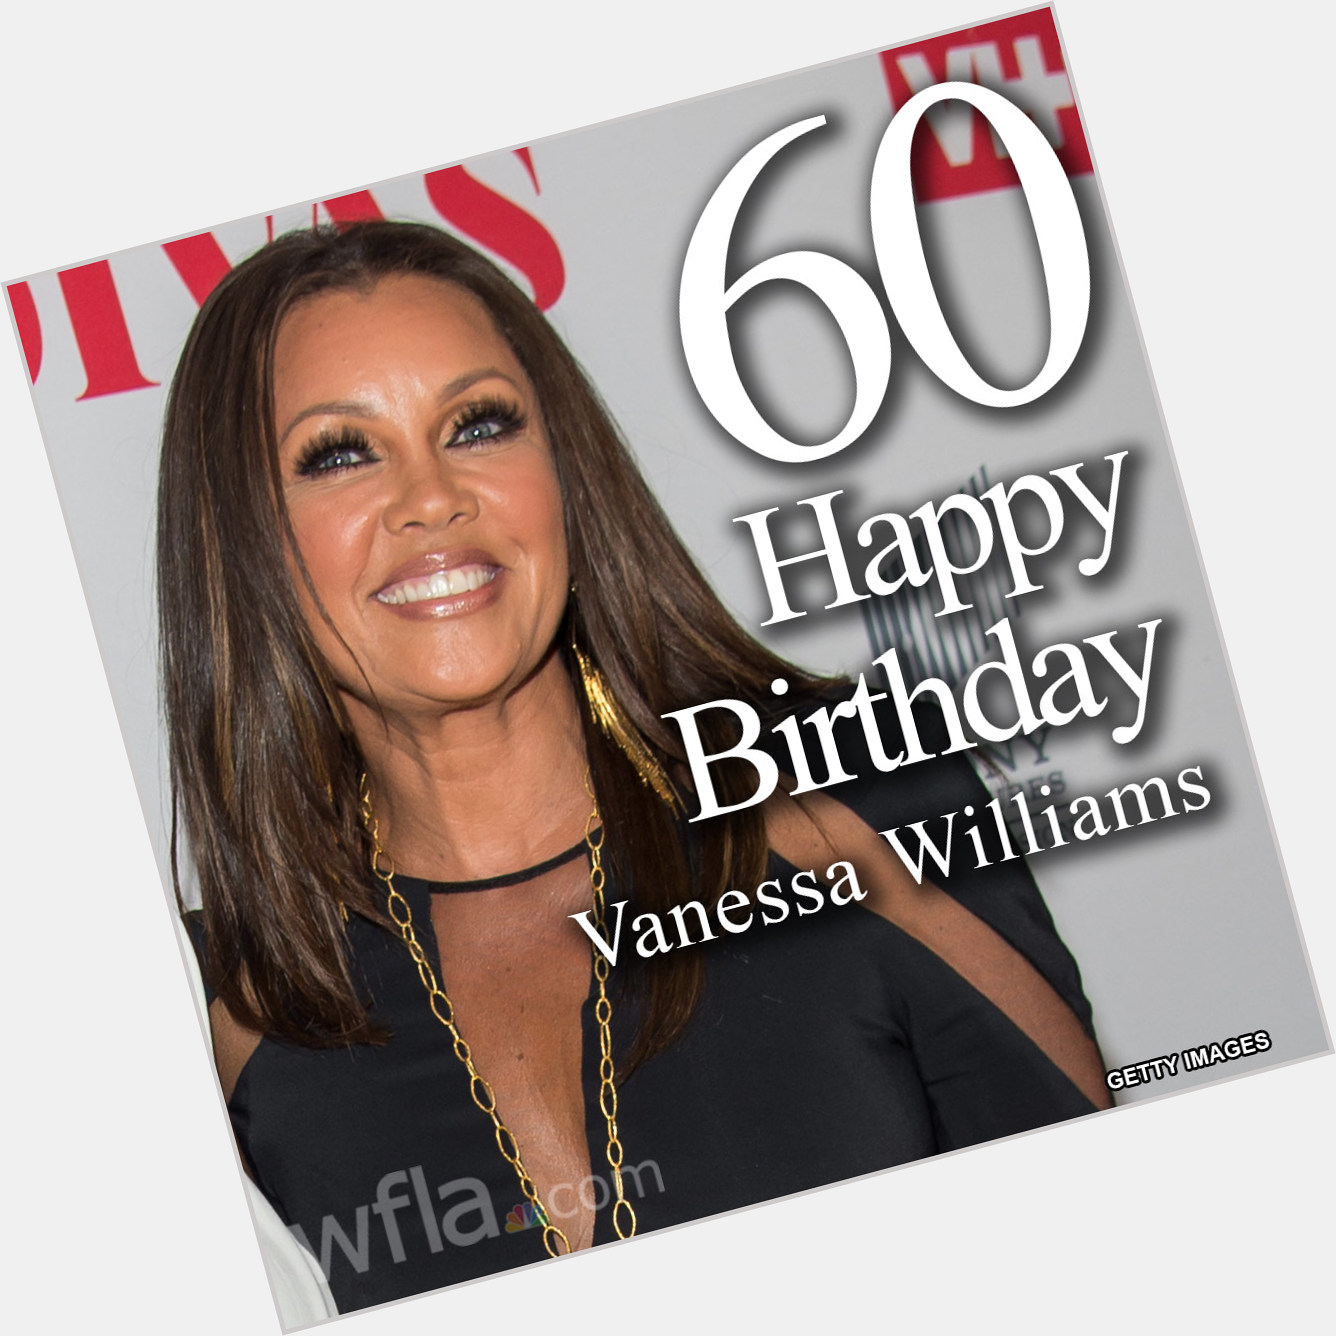 HAPPY BIRTHDAY VANESSA WILLIAMS The actress and singer turns 60 today!  